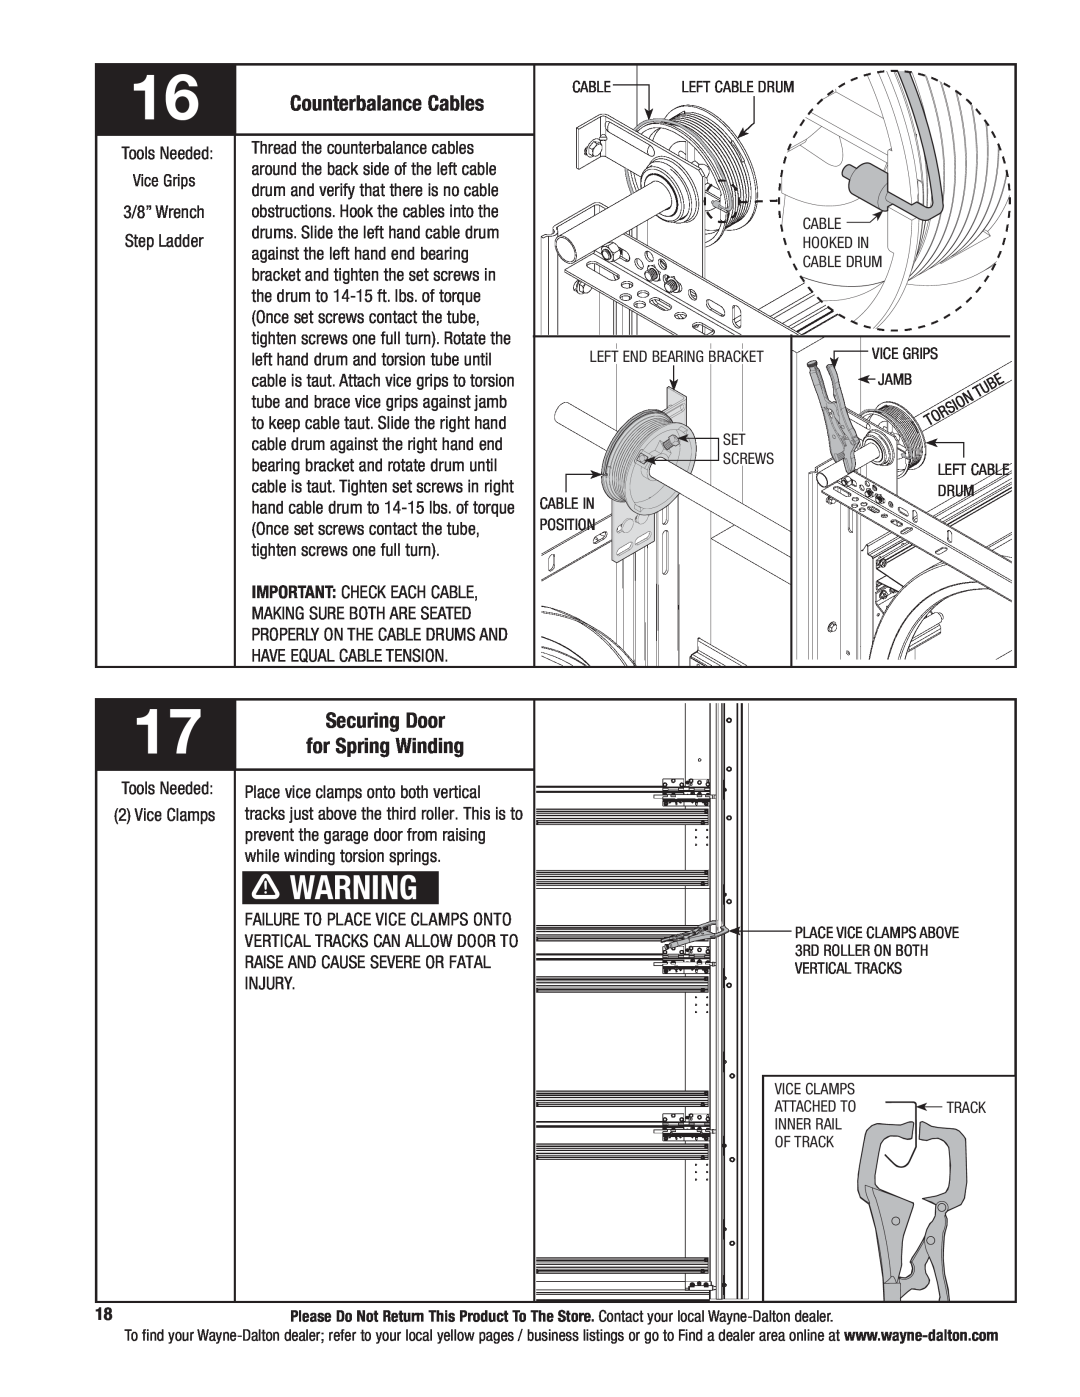 Wayne-Dalton 9800 installation instructions Securing Door, for Spring Winding, Counterbalance Cables 